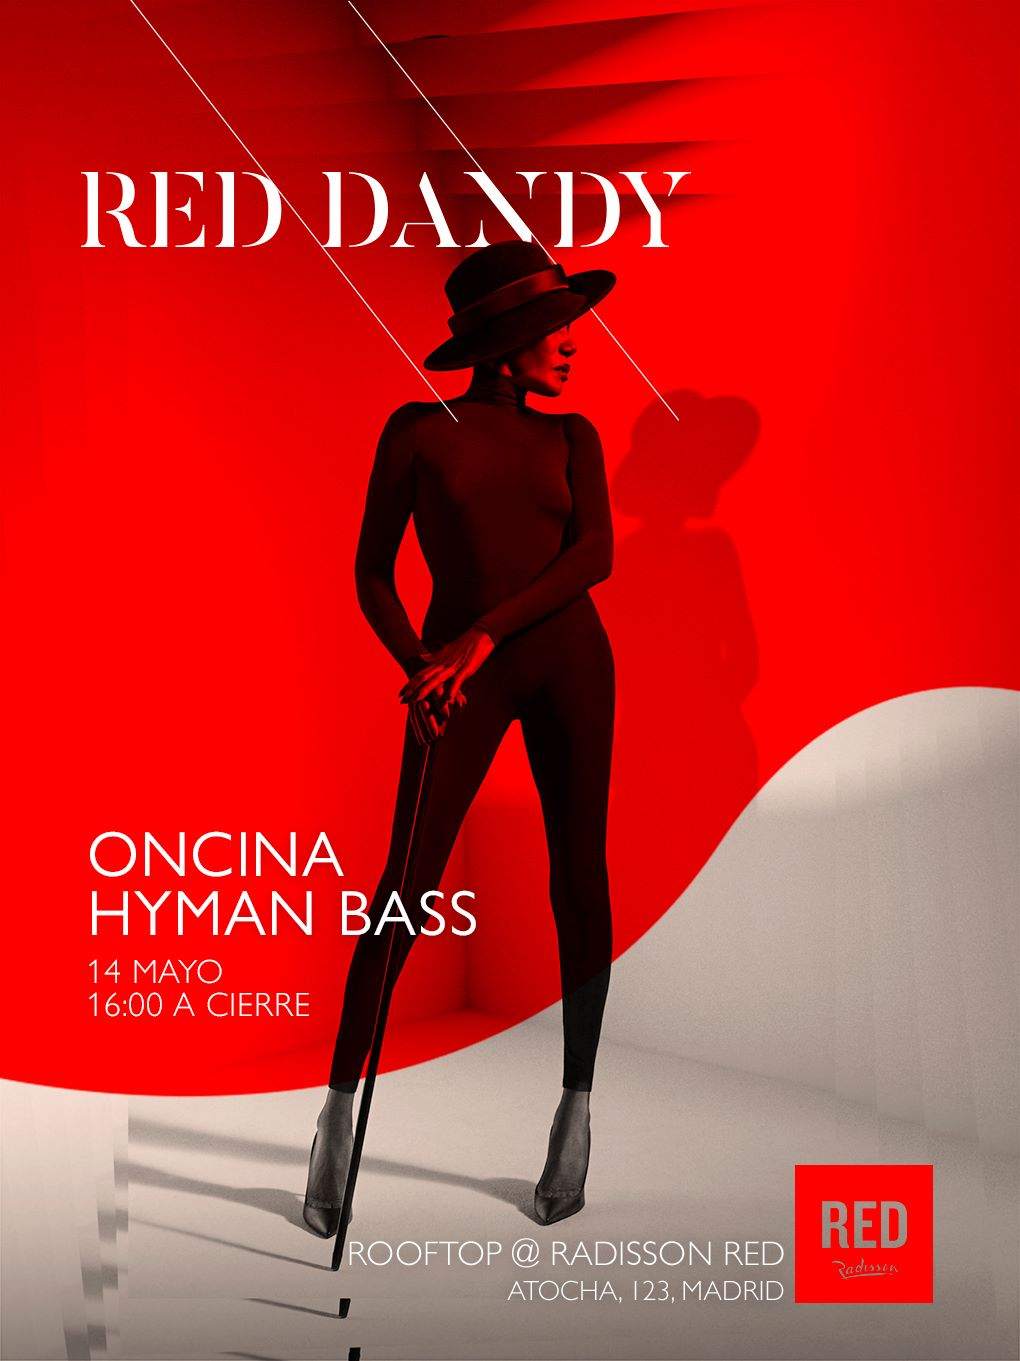 Red Dandy @ Radisson Red Rooftop: Oncina + Hyman Bass - フライヤー表